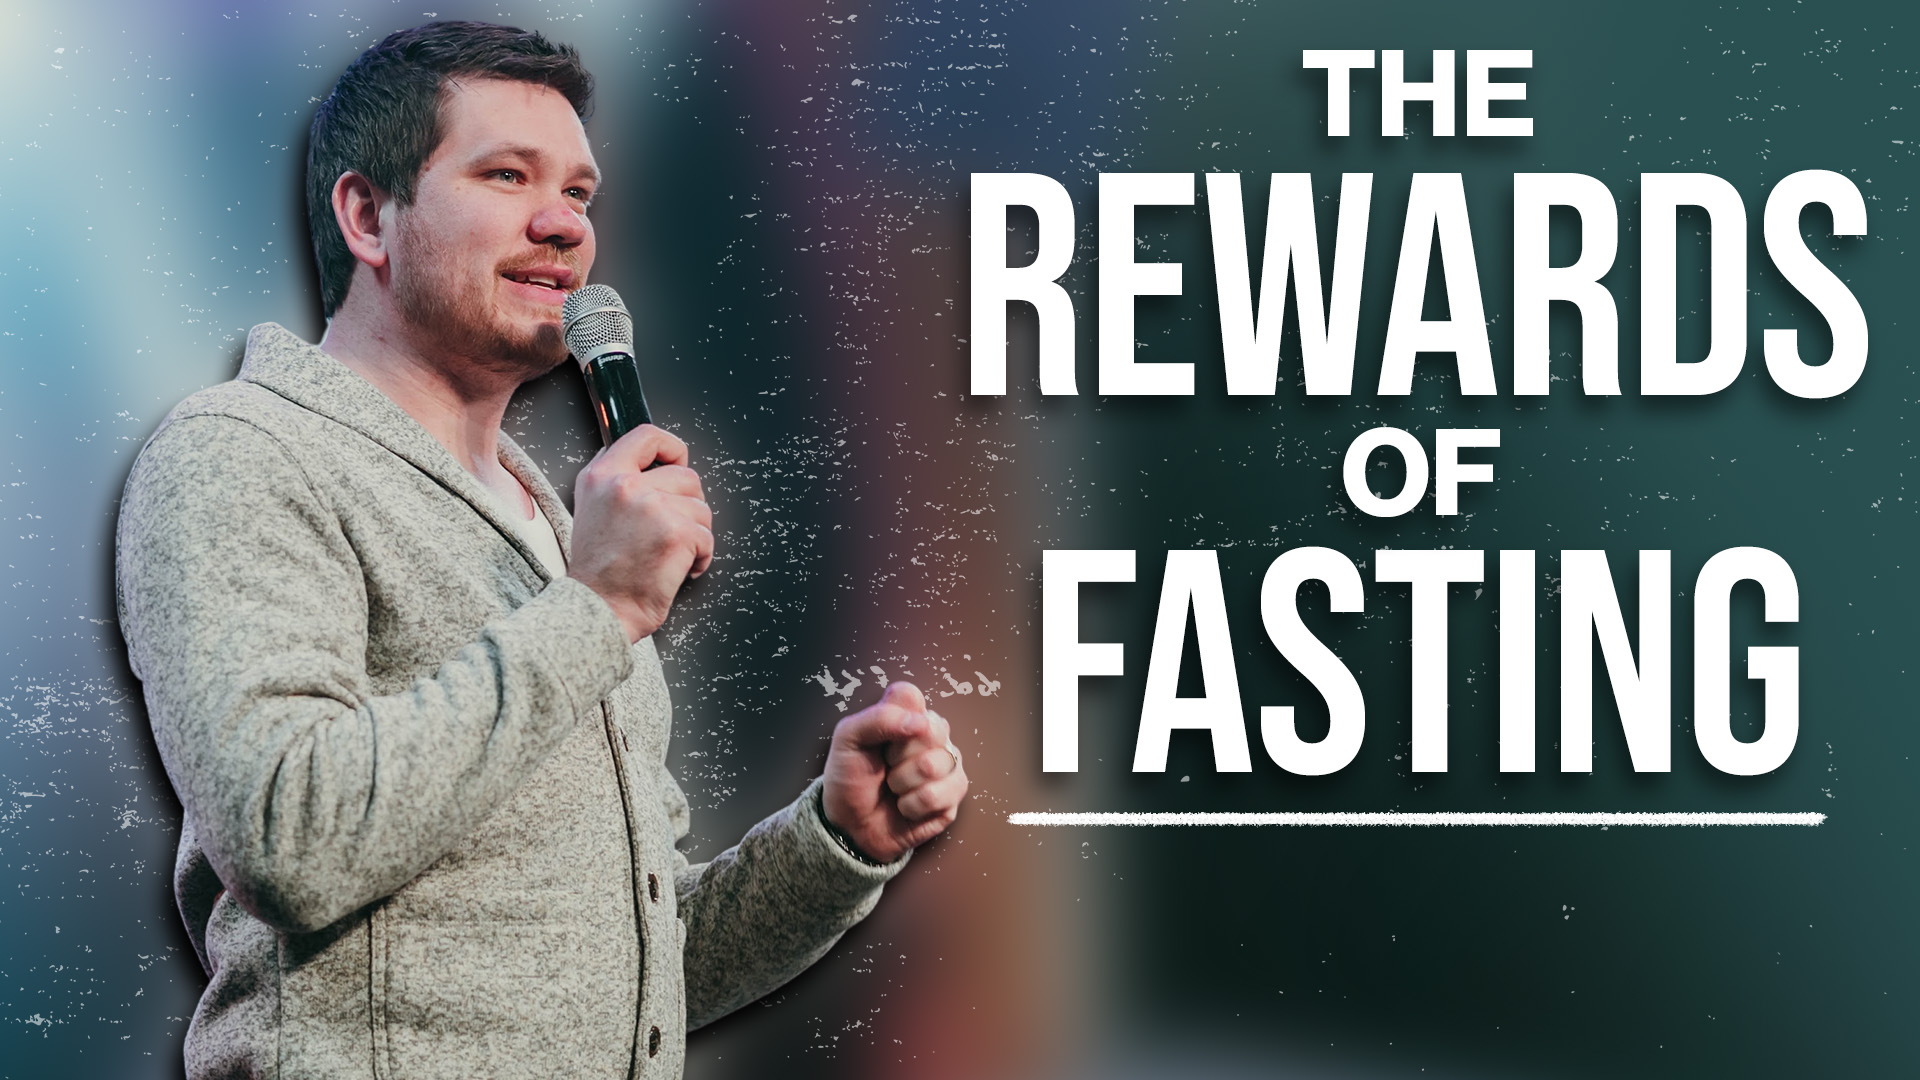 Featured image for “The Rewards of Fasting”